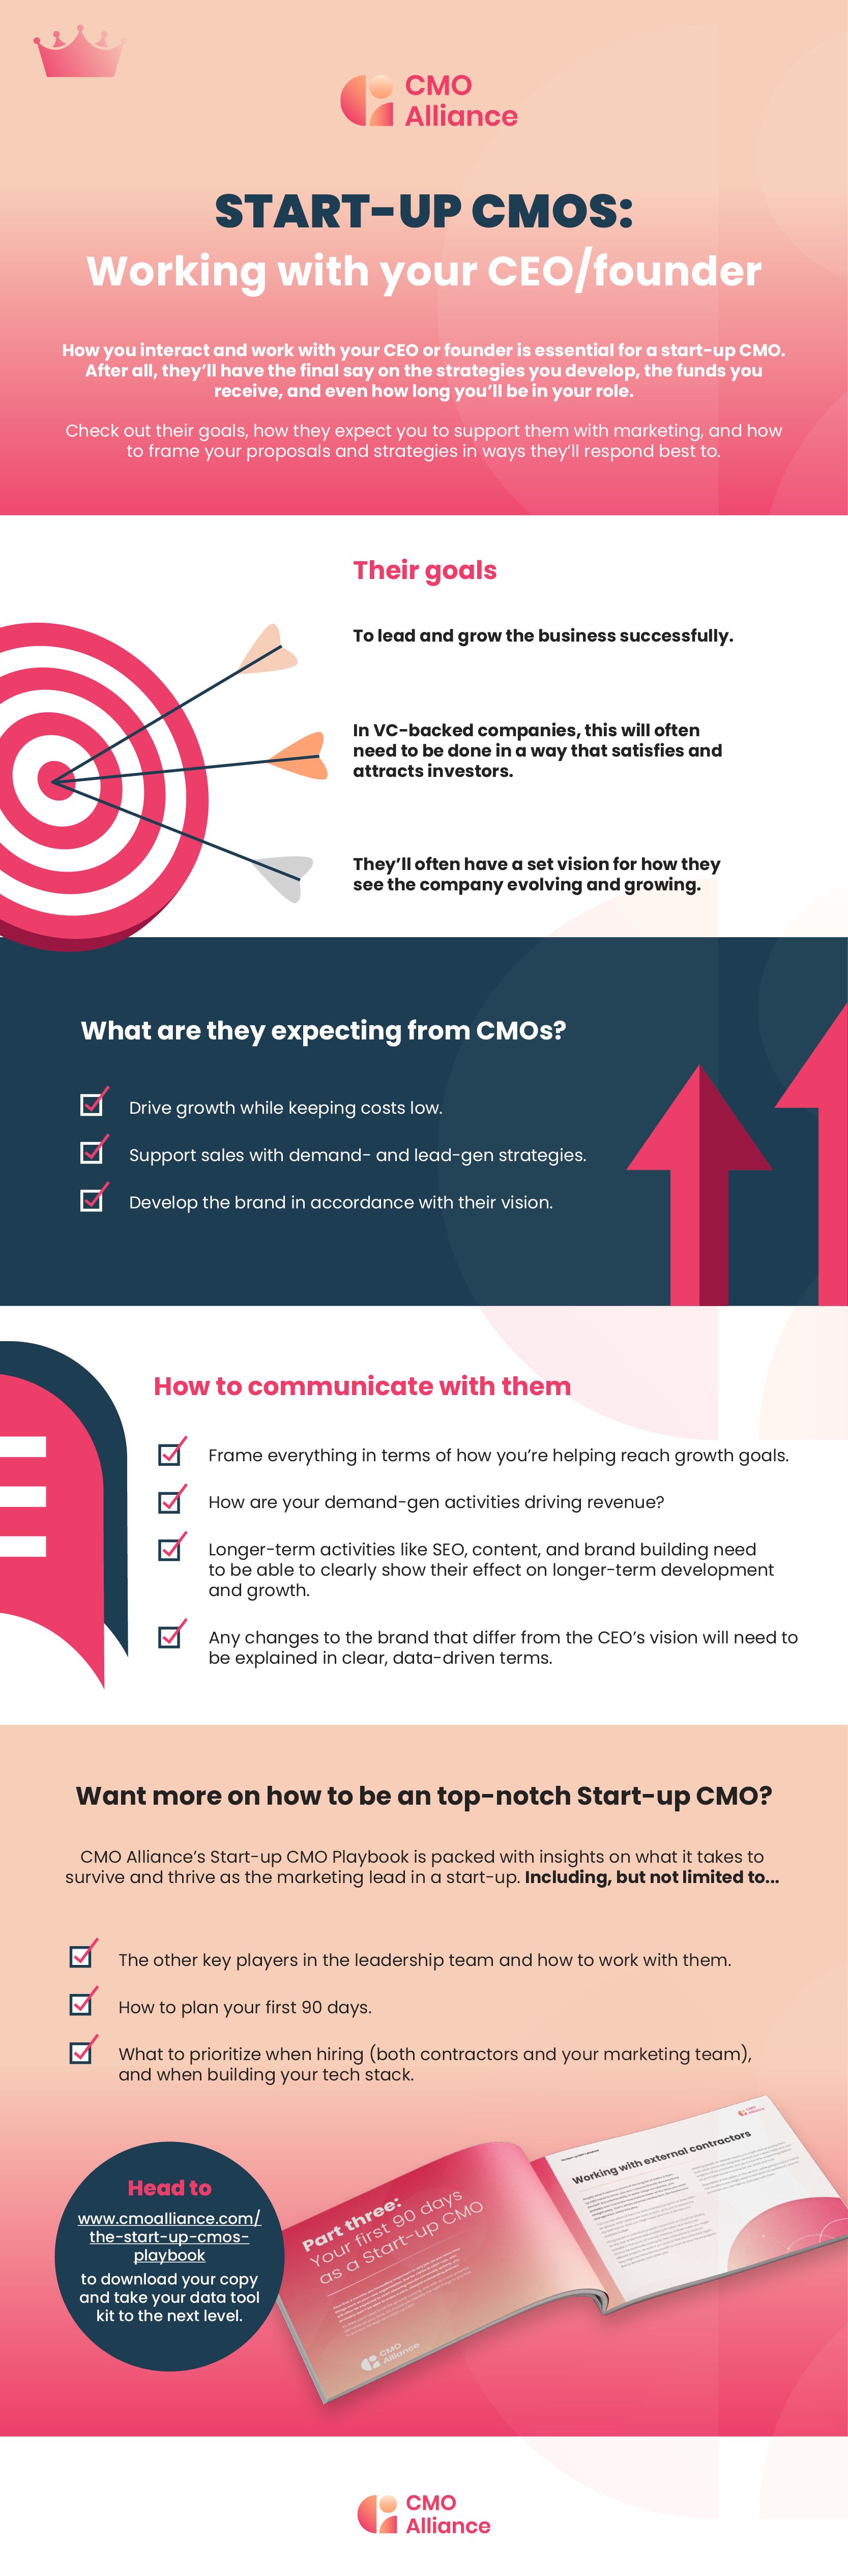 Infographic showing how CMOs and CEOs in start-ups can work well together.